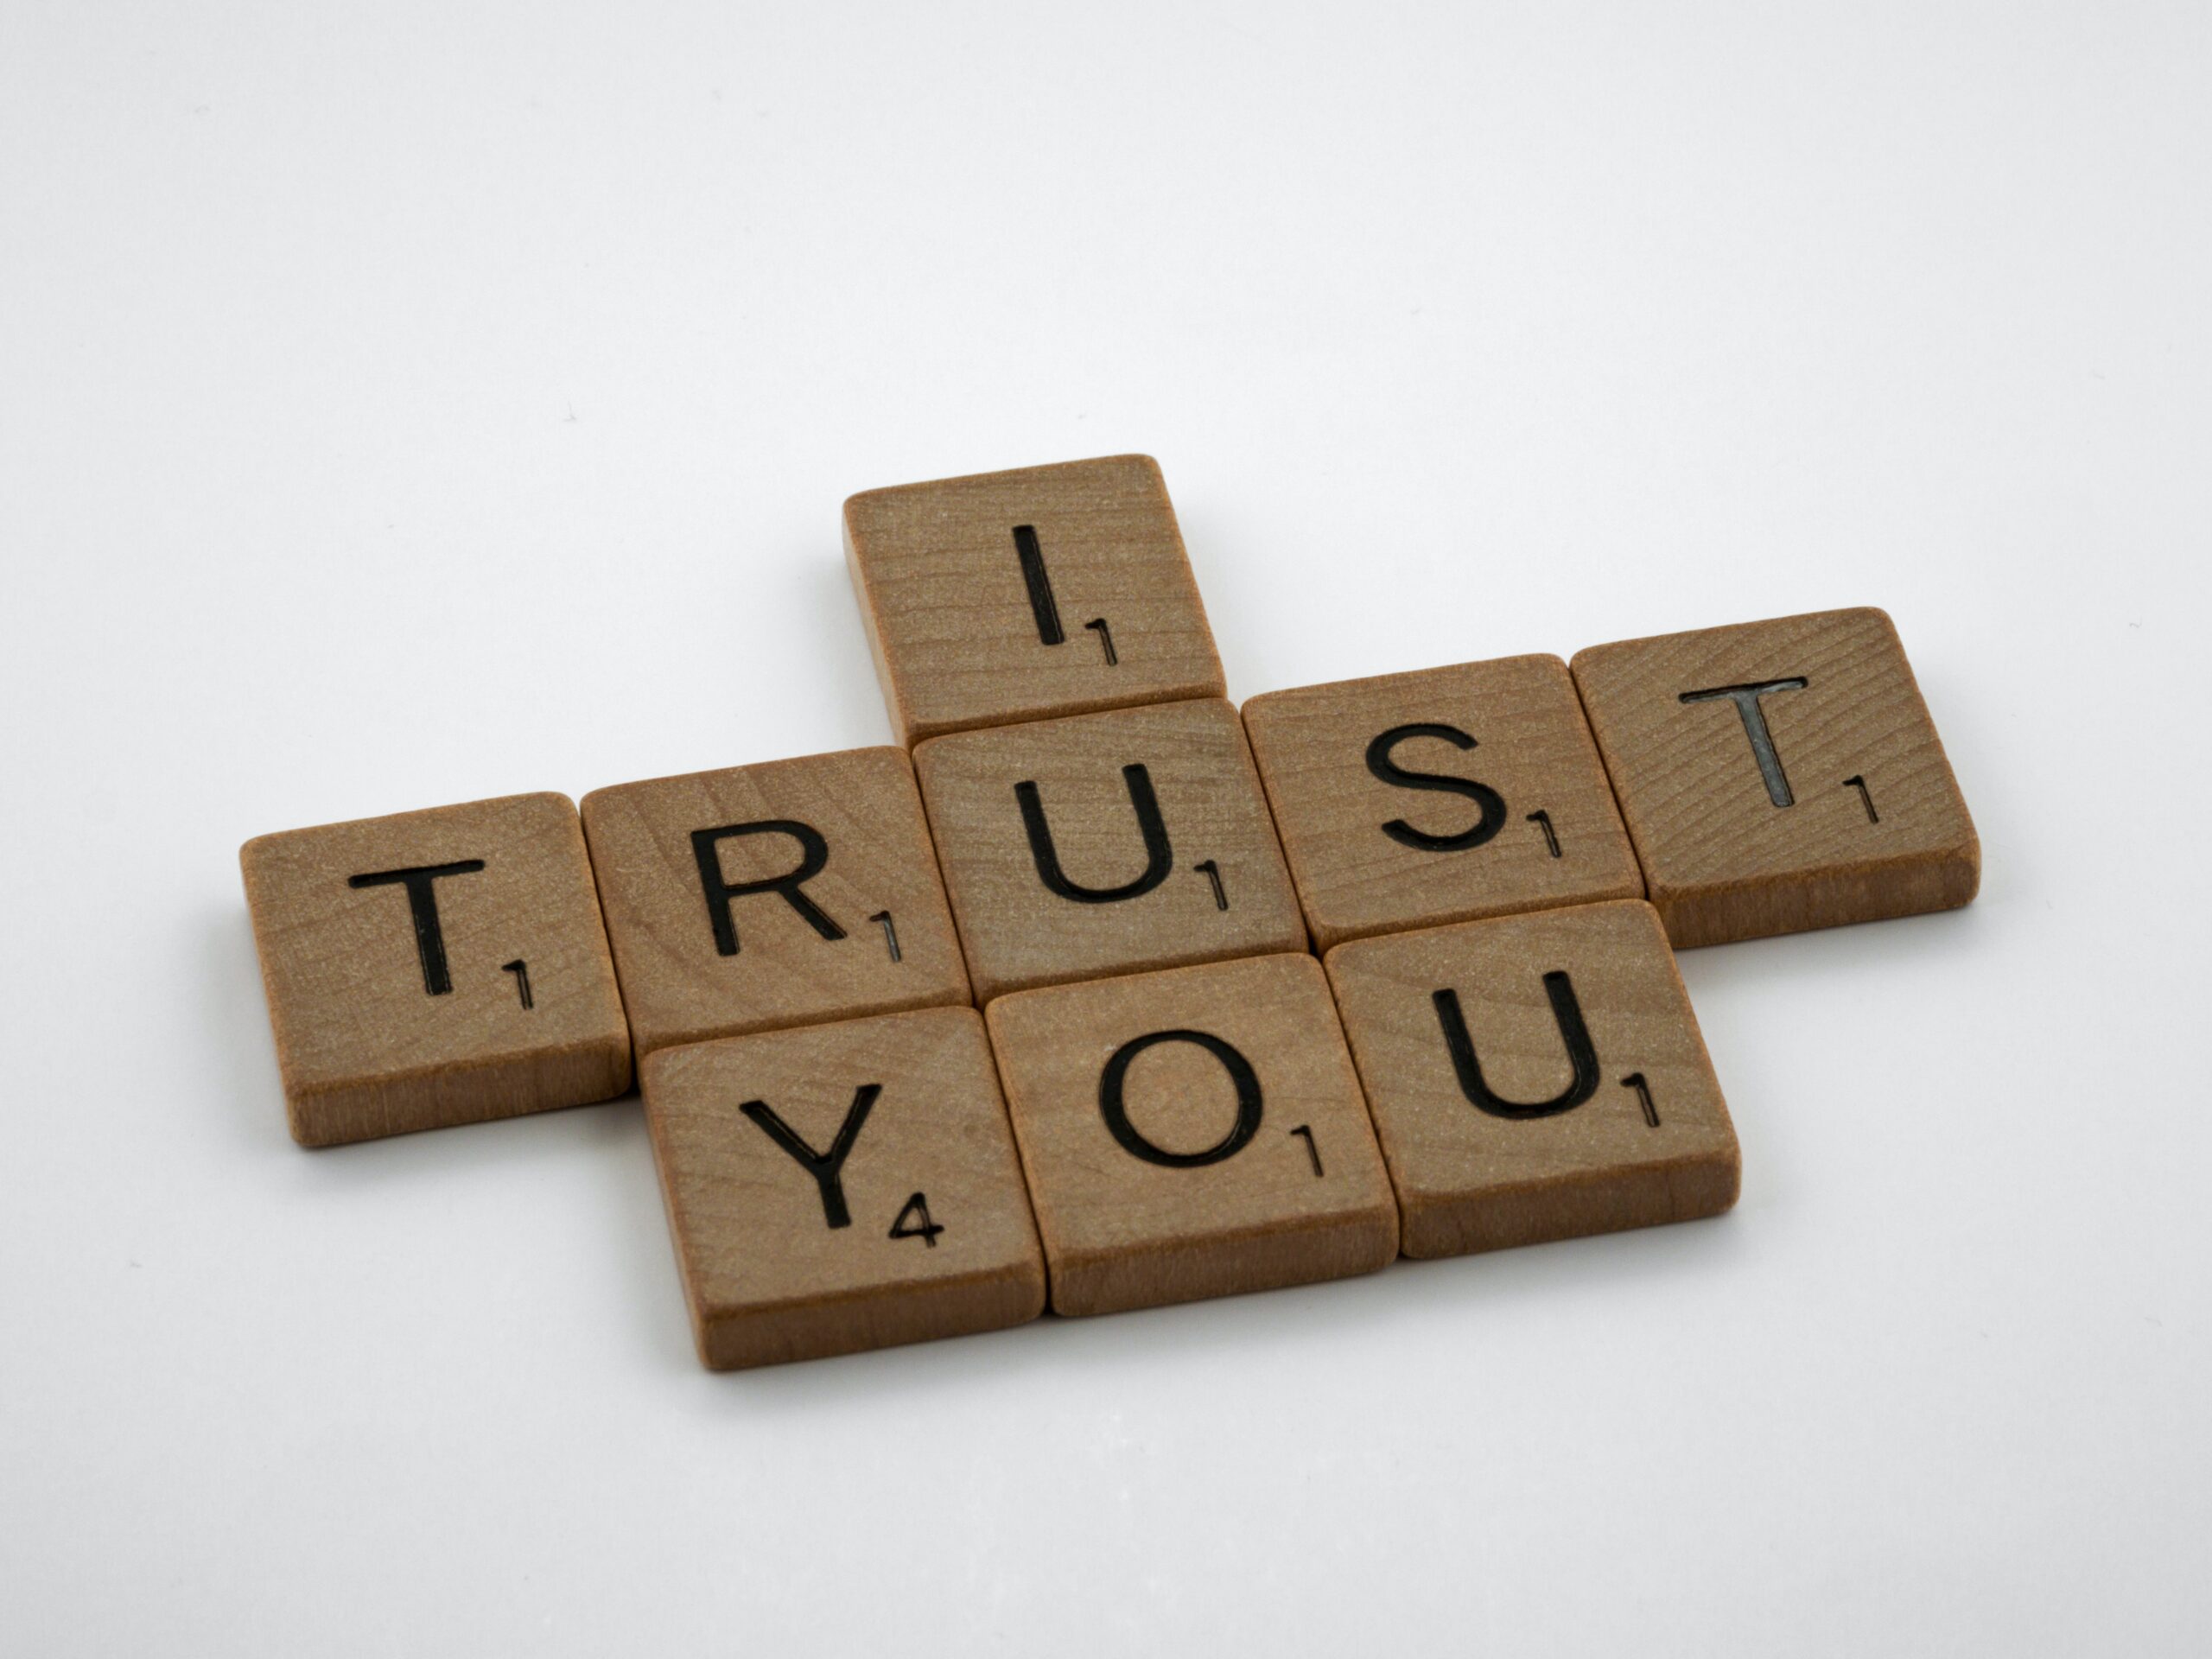 Read How Trustworthy is Your Leadership?